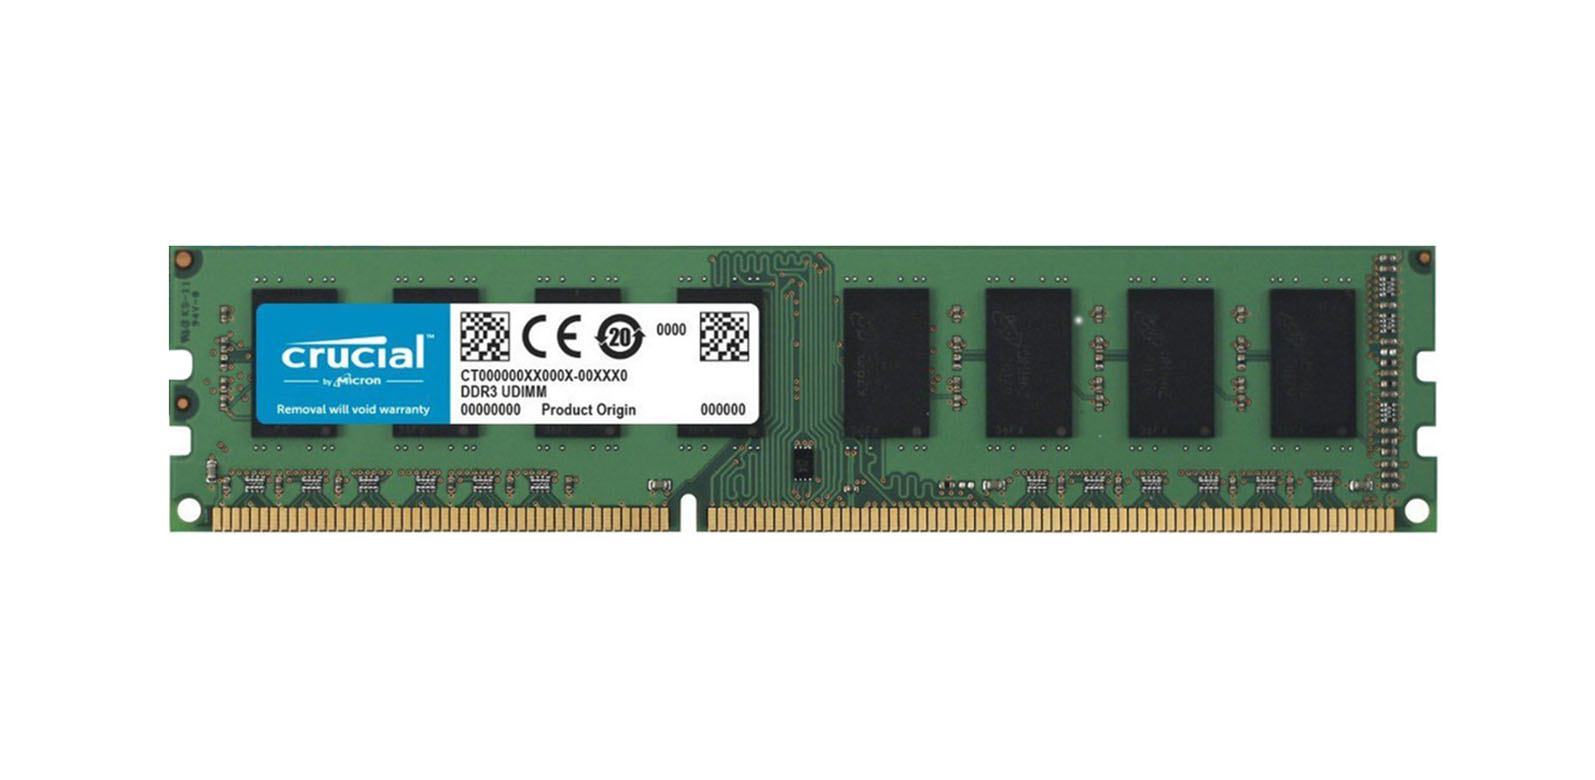 Crucial CT5318488 8GB DDR3-1600MHz PC3-12800 ECC Registered CL11 240-Pin DIMM 1.35V Low Voltage Dual Rank Very Low Profile (VLP) Memory Module Upgrade for Tyan B7018Y290D2-045W8HR